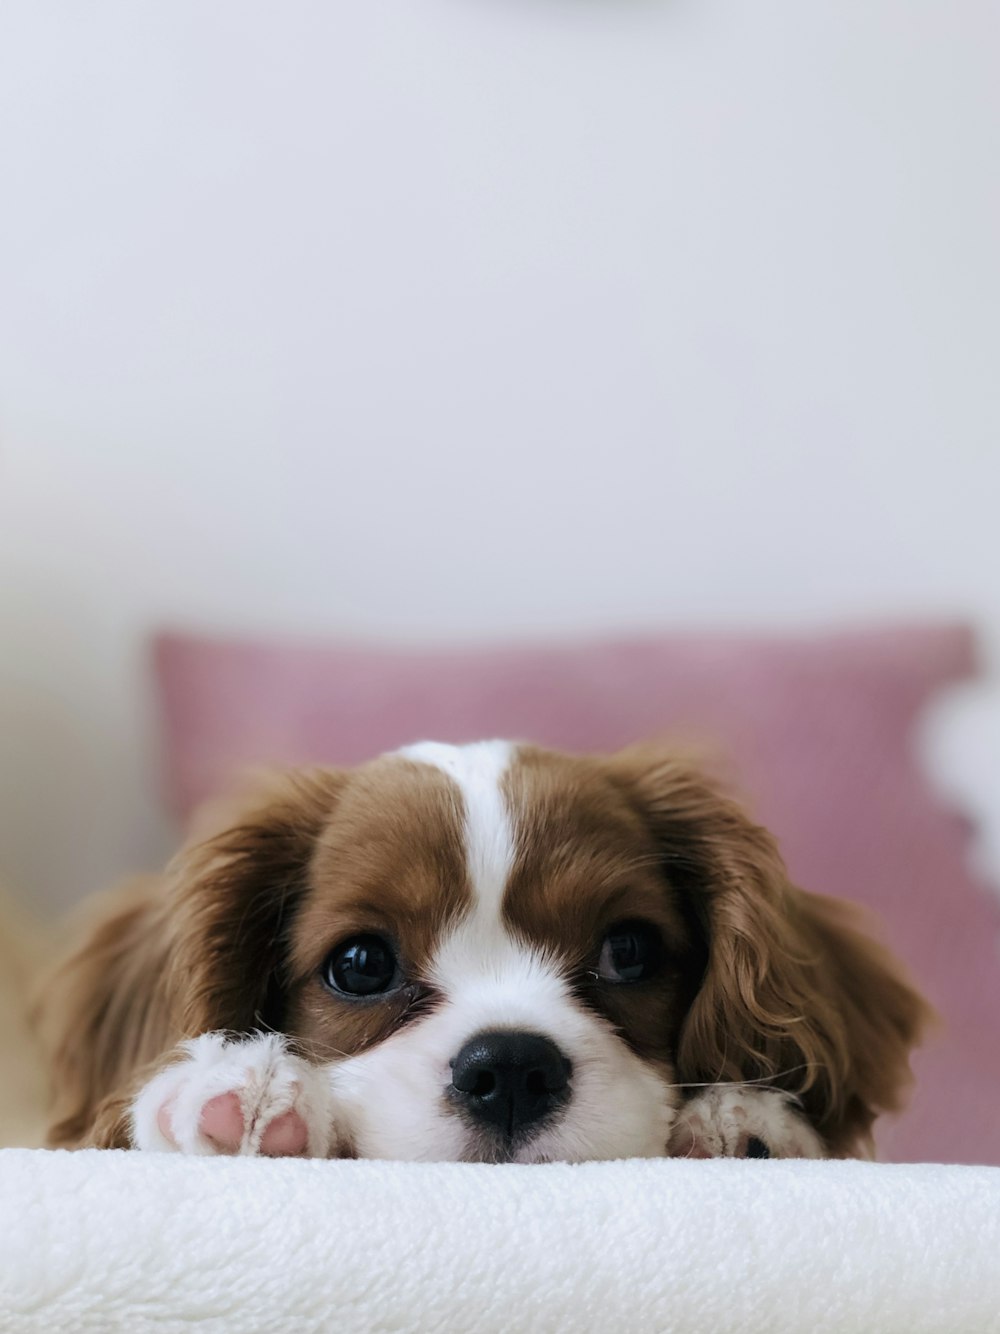 Dog Puppy Pictures | Download Free Images on Unsplash